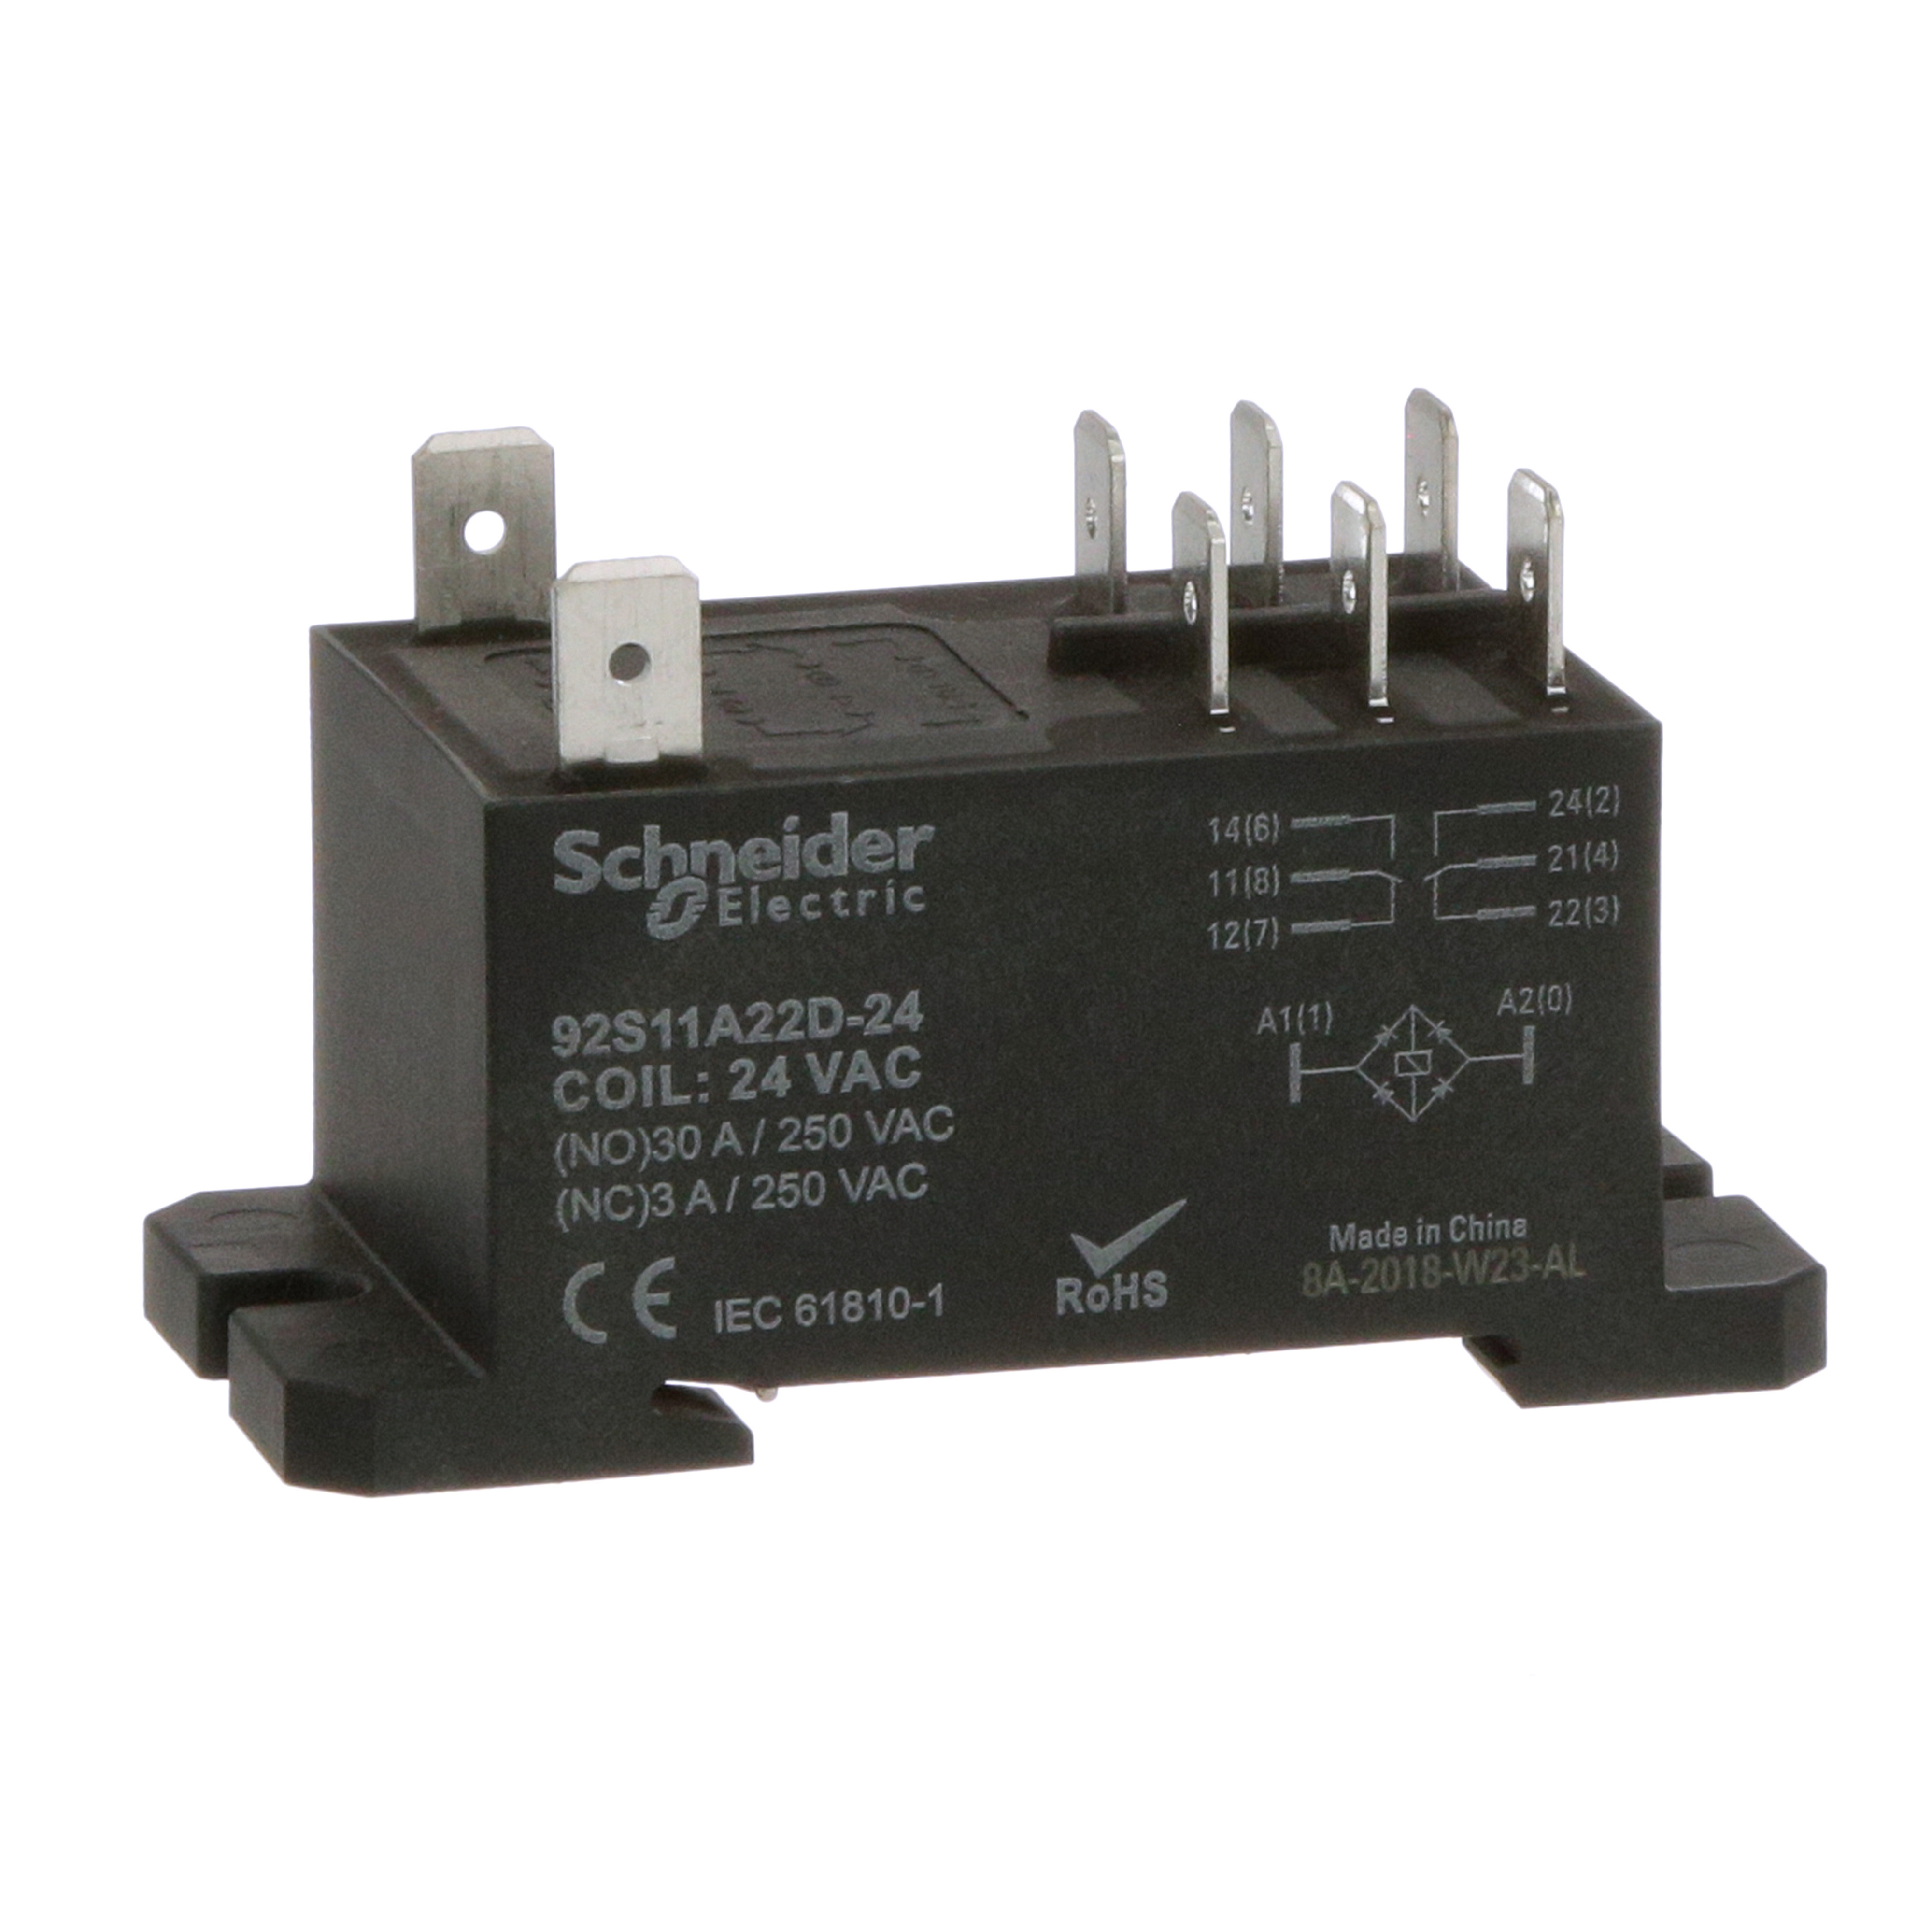 Power Relay, DPDT, class F coil insulation, DIN rail and panel mount cover, 30A, 24V AC, 2 C/O